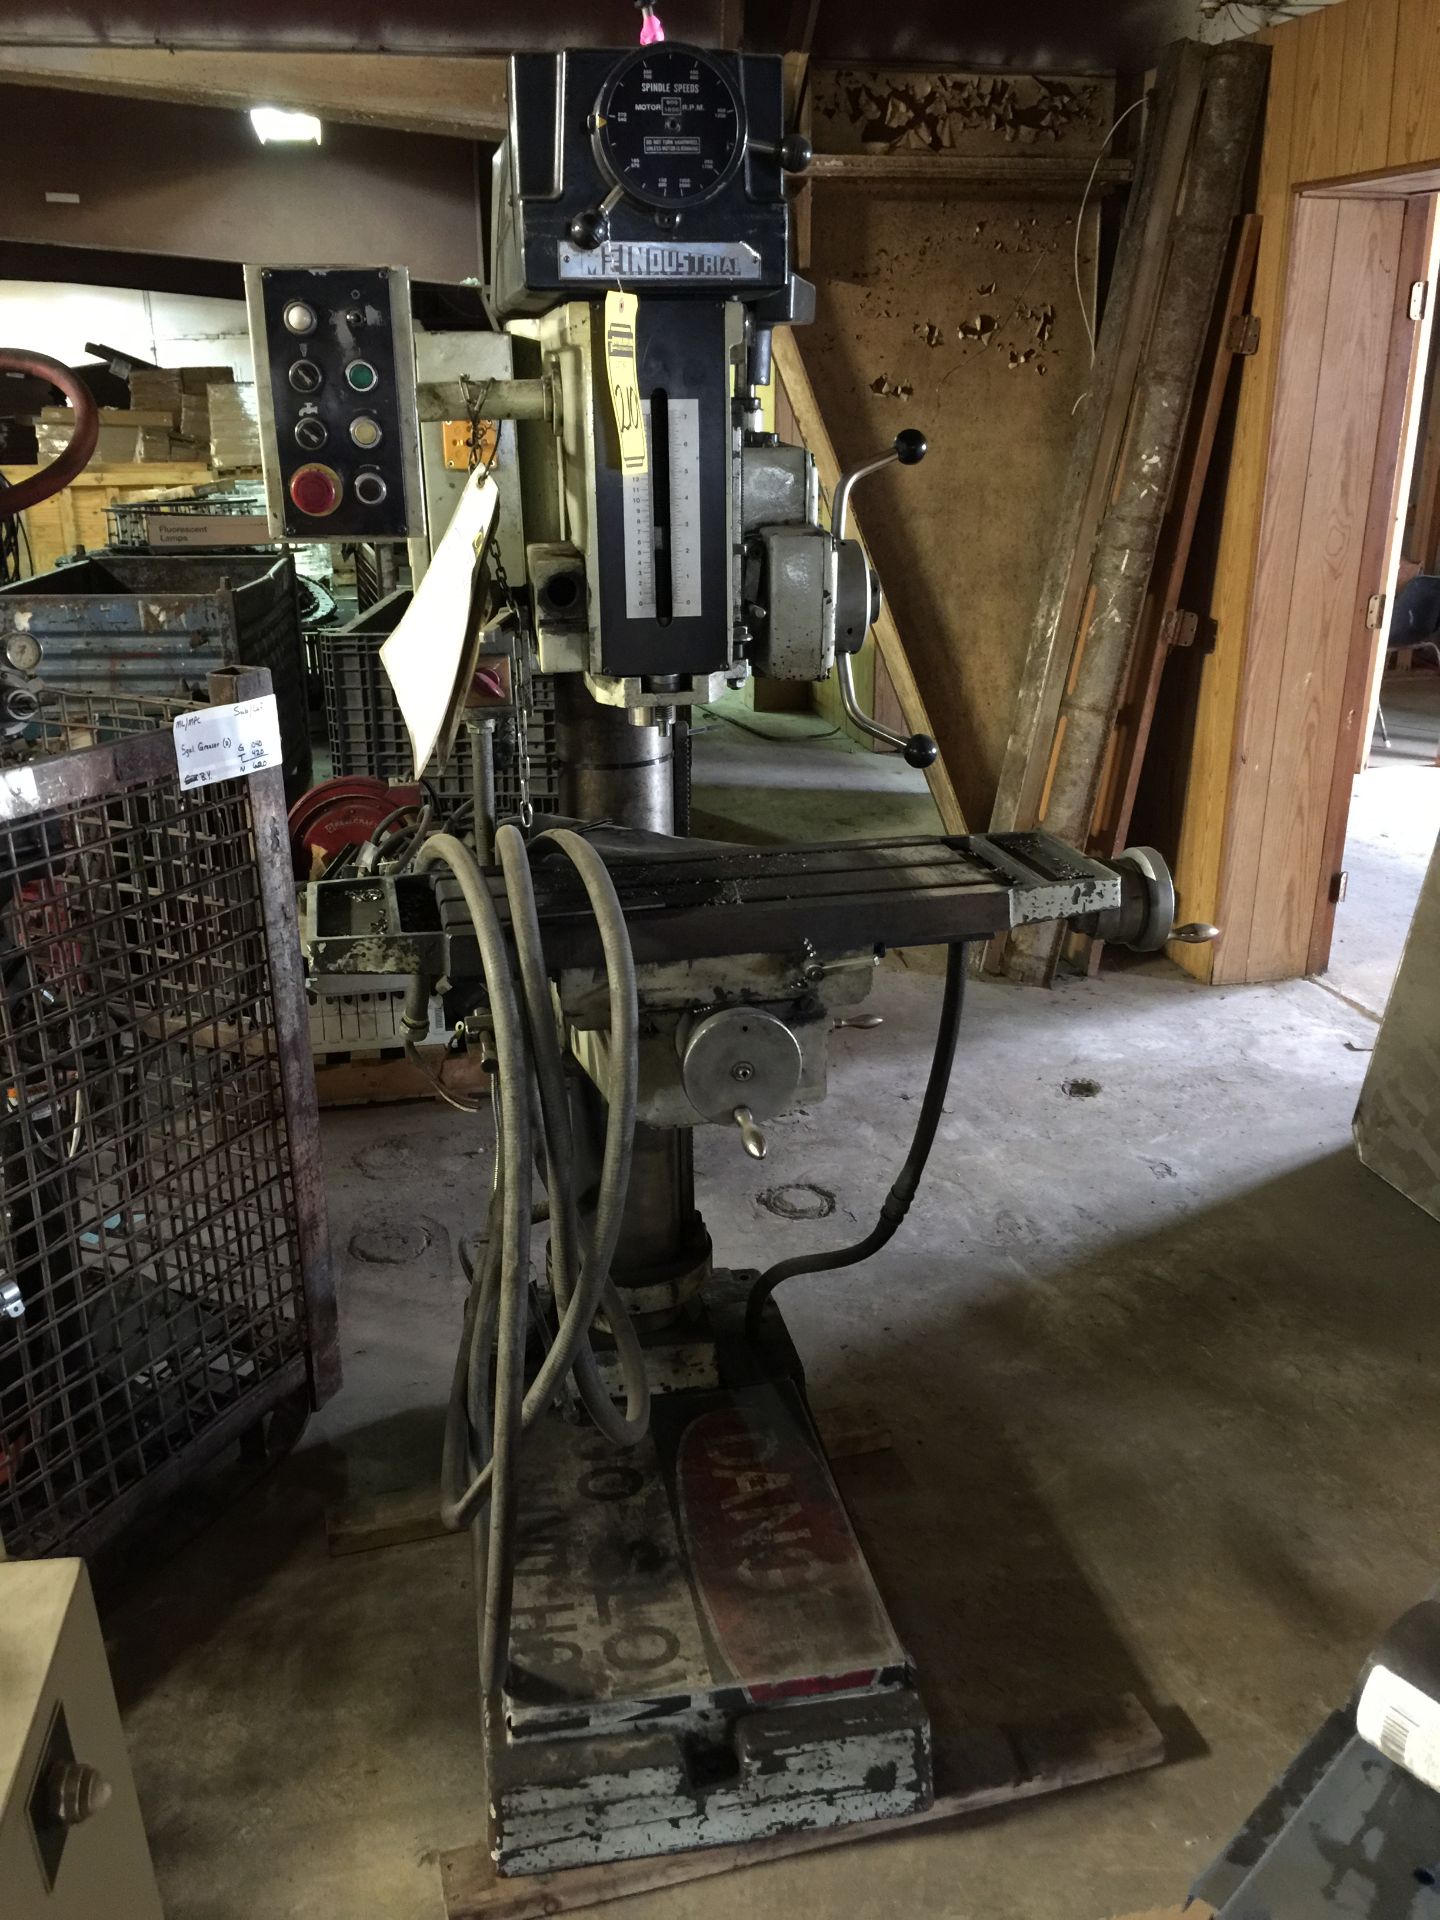 MSC INDUSTRIAL SUPPLY COMPANY 711VS DRILL PRESS, MODEL 9512427, S/N 404057 (LOCATED IN SEYMOUR, IN) - Image 6 of 6